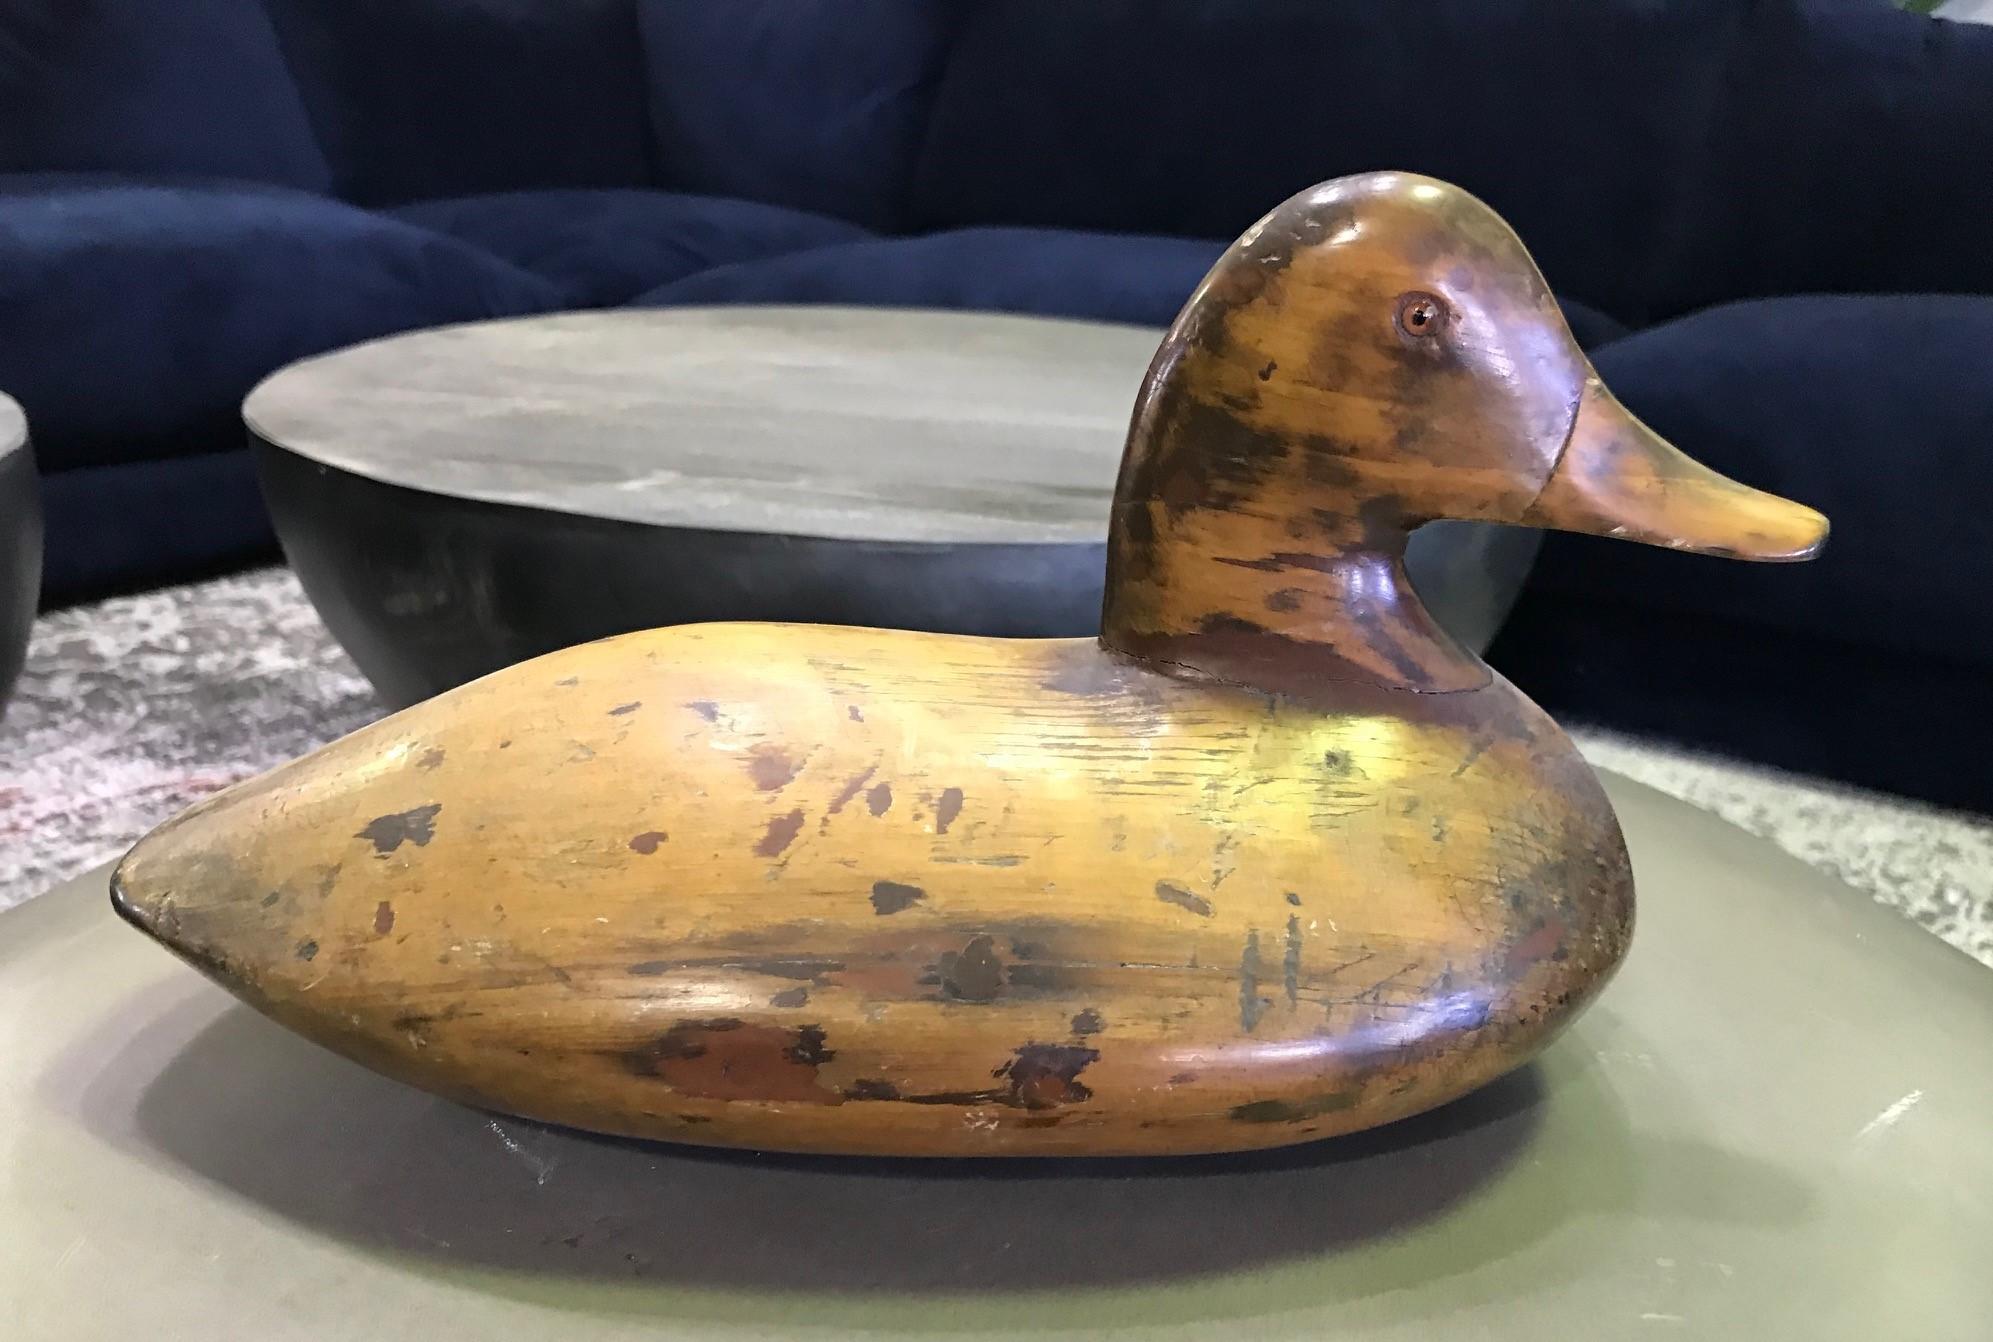 A fantastic early to mid-20th century handmade duck decoy. Beautiful, rich patina that comes with age. Well carved and has what appears to be glass eyes. 

From an extensive collection of vintage /antique duck decoys including a pair by D. W.